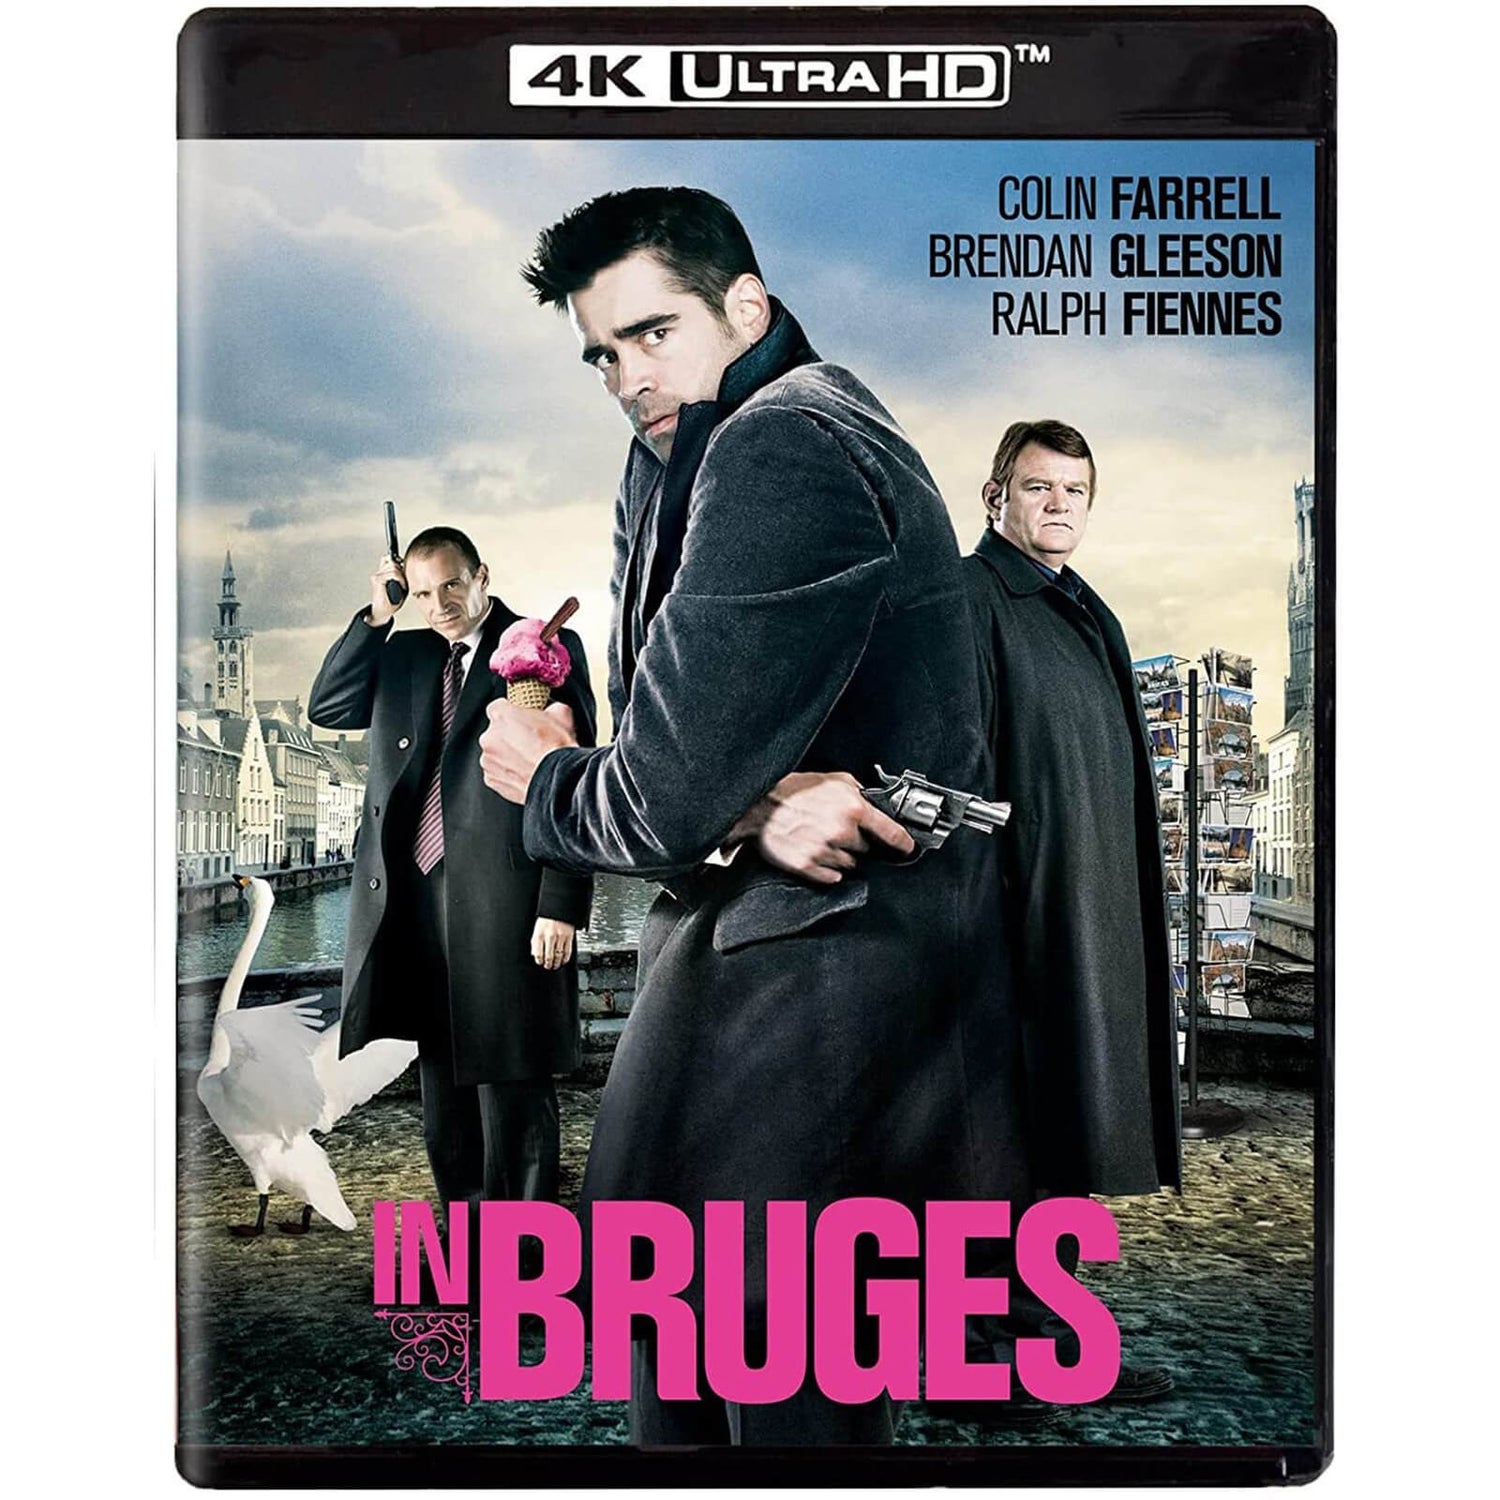 In Bruges 4K Ultra HD (Includes Blu-ray)